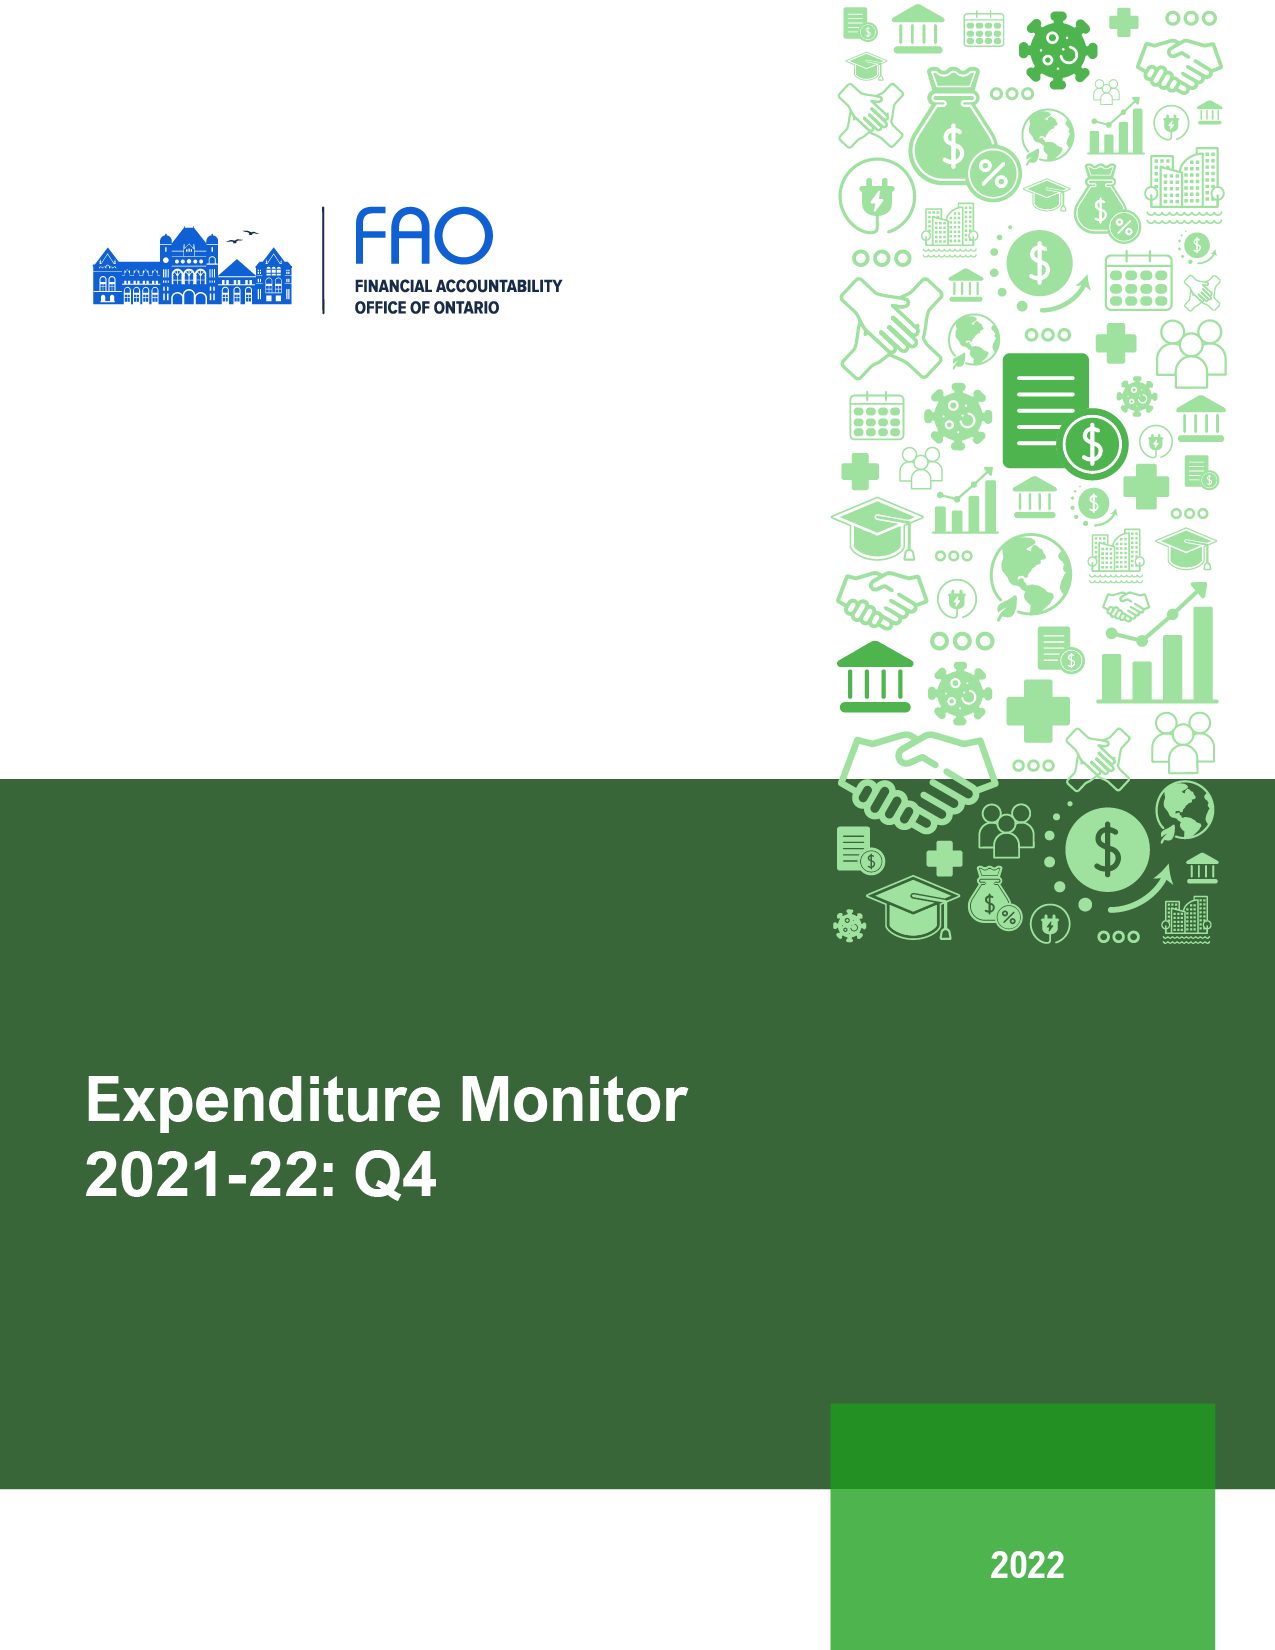 Expenditure Monitor 2021-22: Q4 report cover